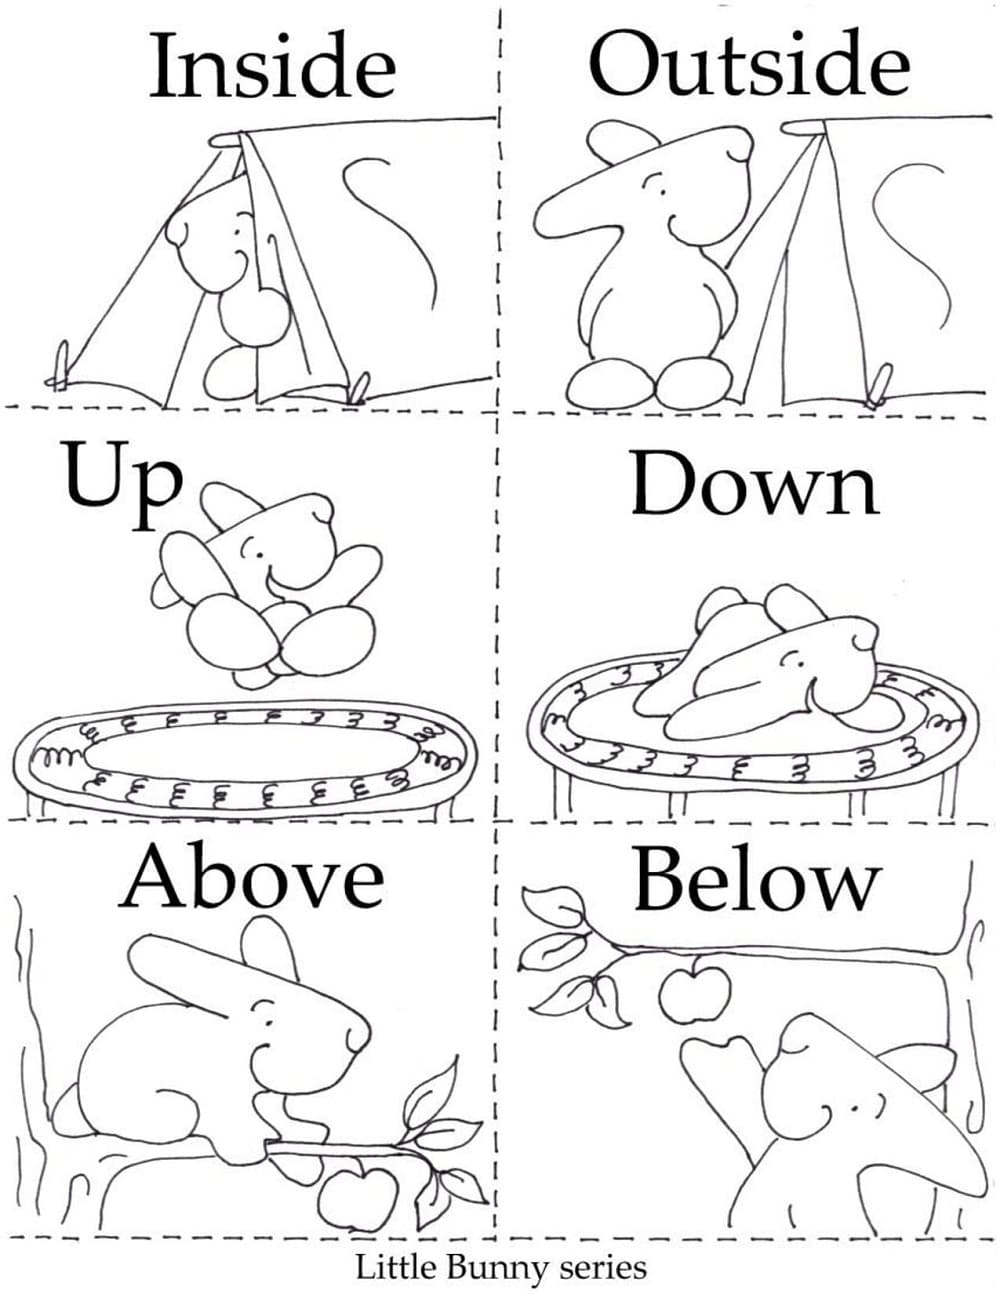 Free Opposites To Print Coloring Page